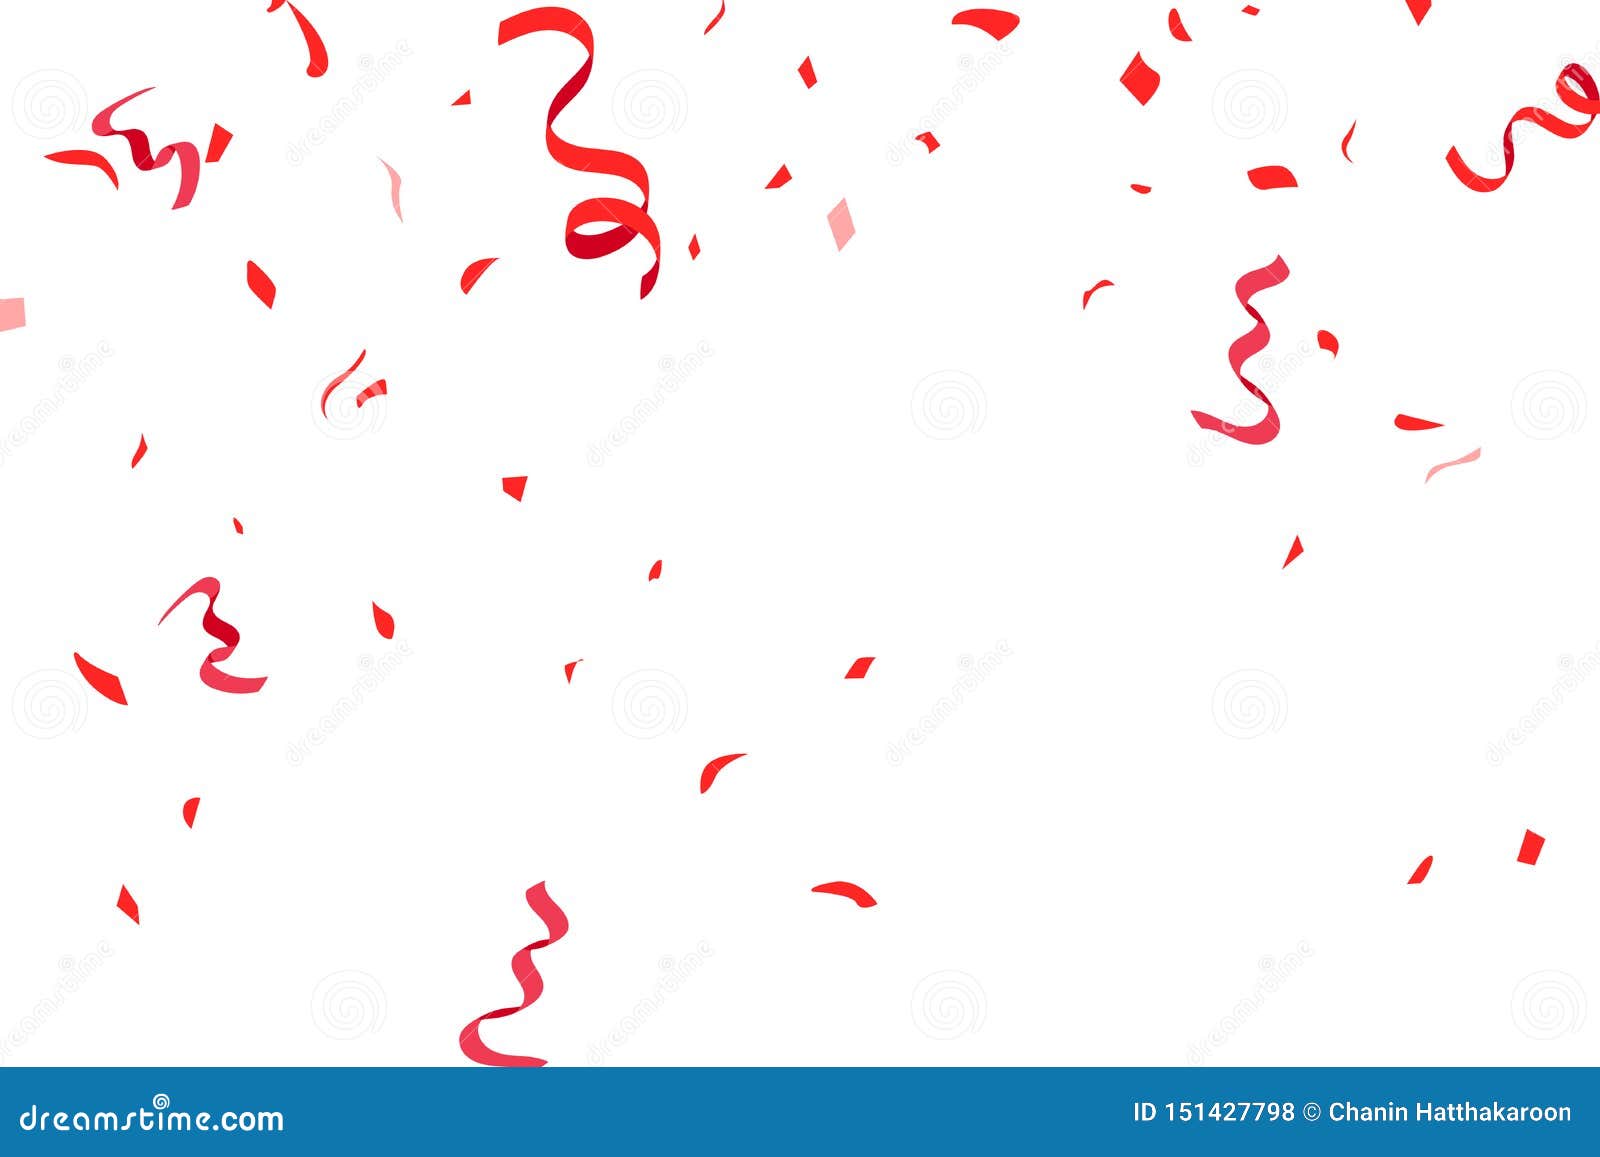 confetti, red ribbon and paper falling, sale event, celebrate party  background